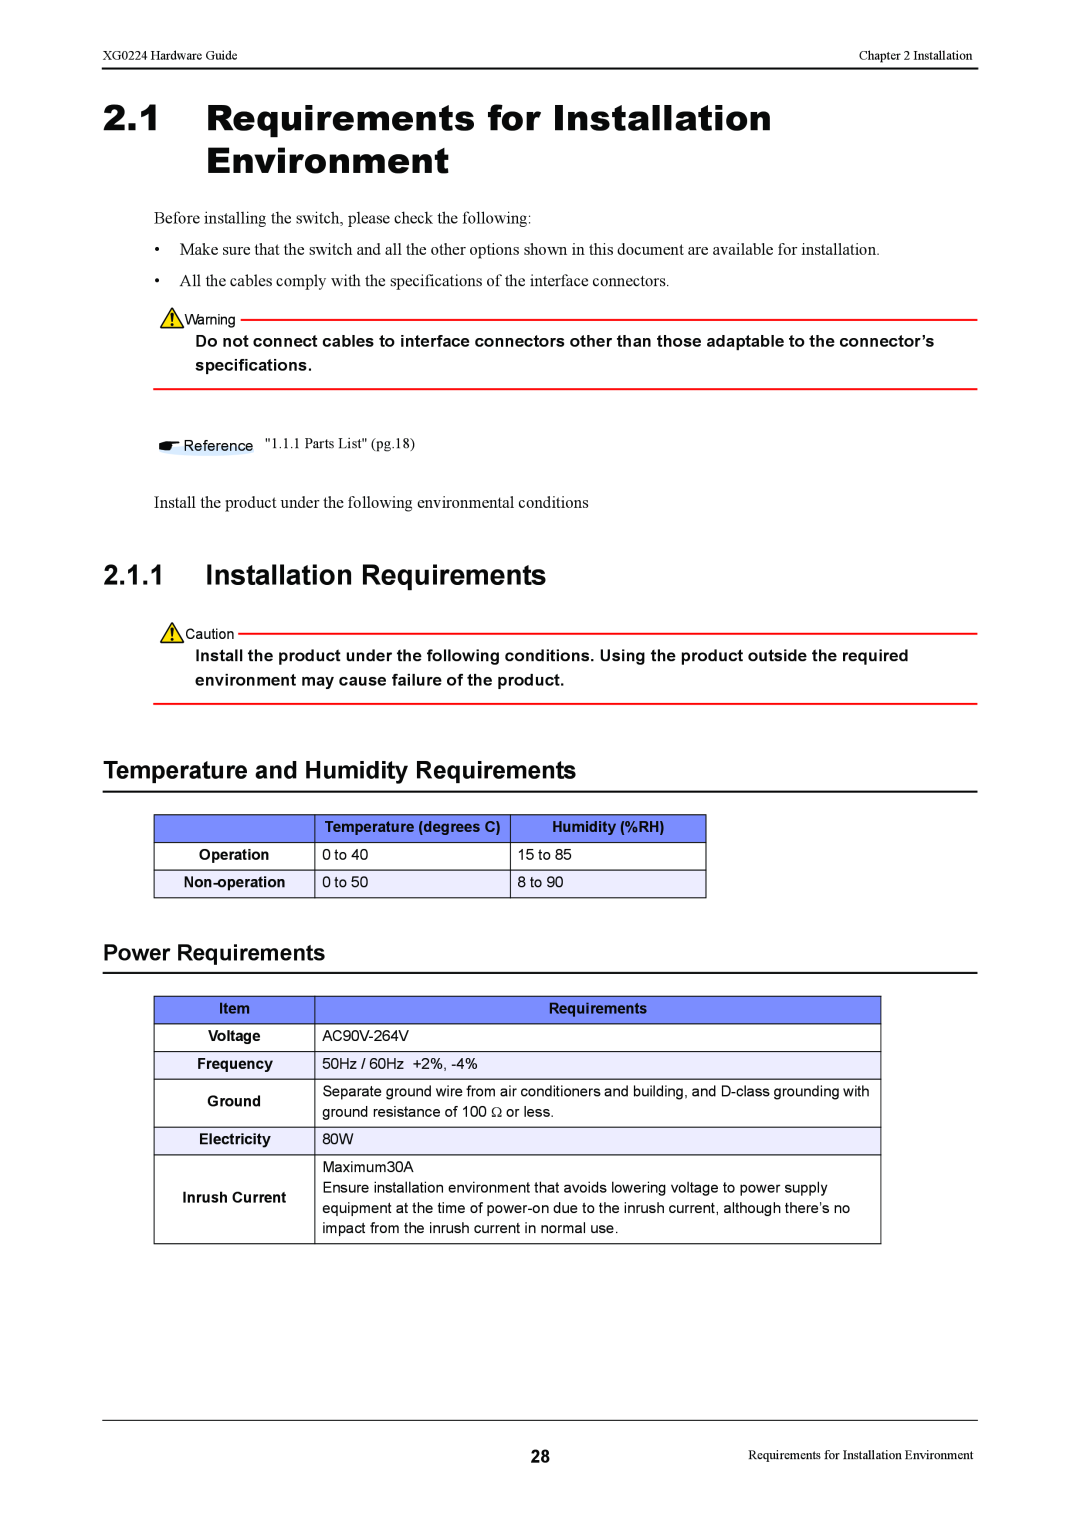 Fujitsu XG0224 Requirements for Installation Environment, Installation Requirements, Temperature and Humidity Requirements 